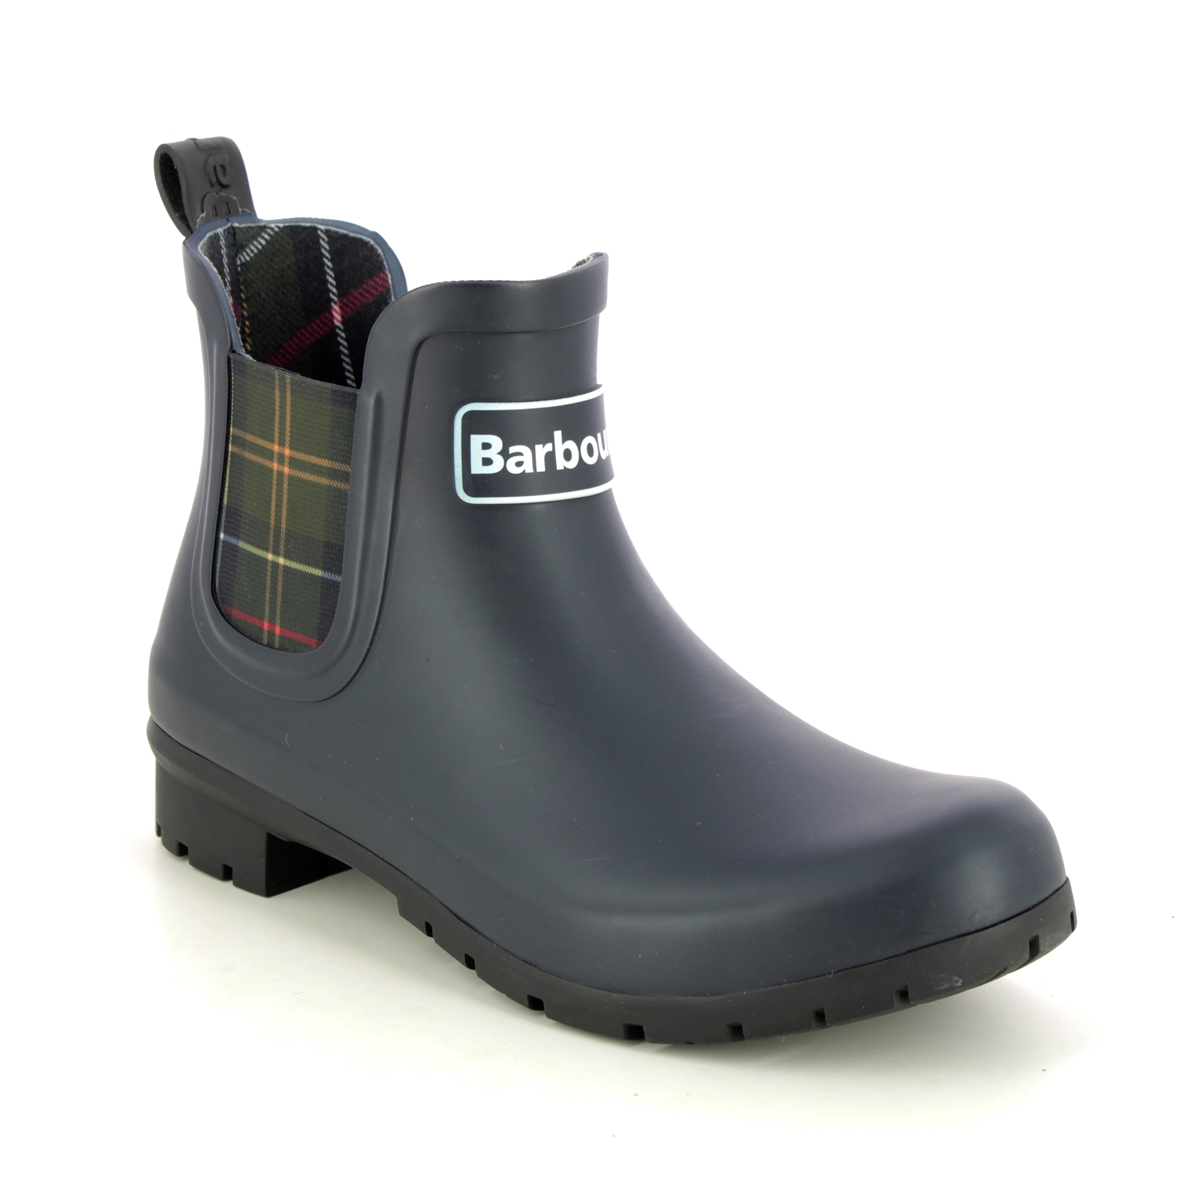 Barbour Kingham Wellie Navy Boots Lrf0088-Ny11 In Size 4 In Plain Navy